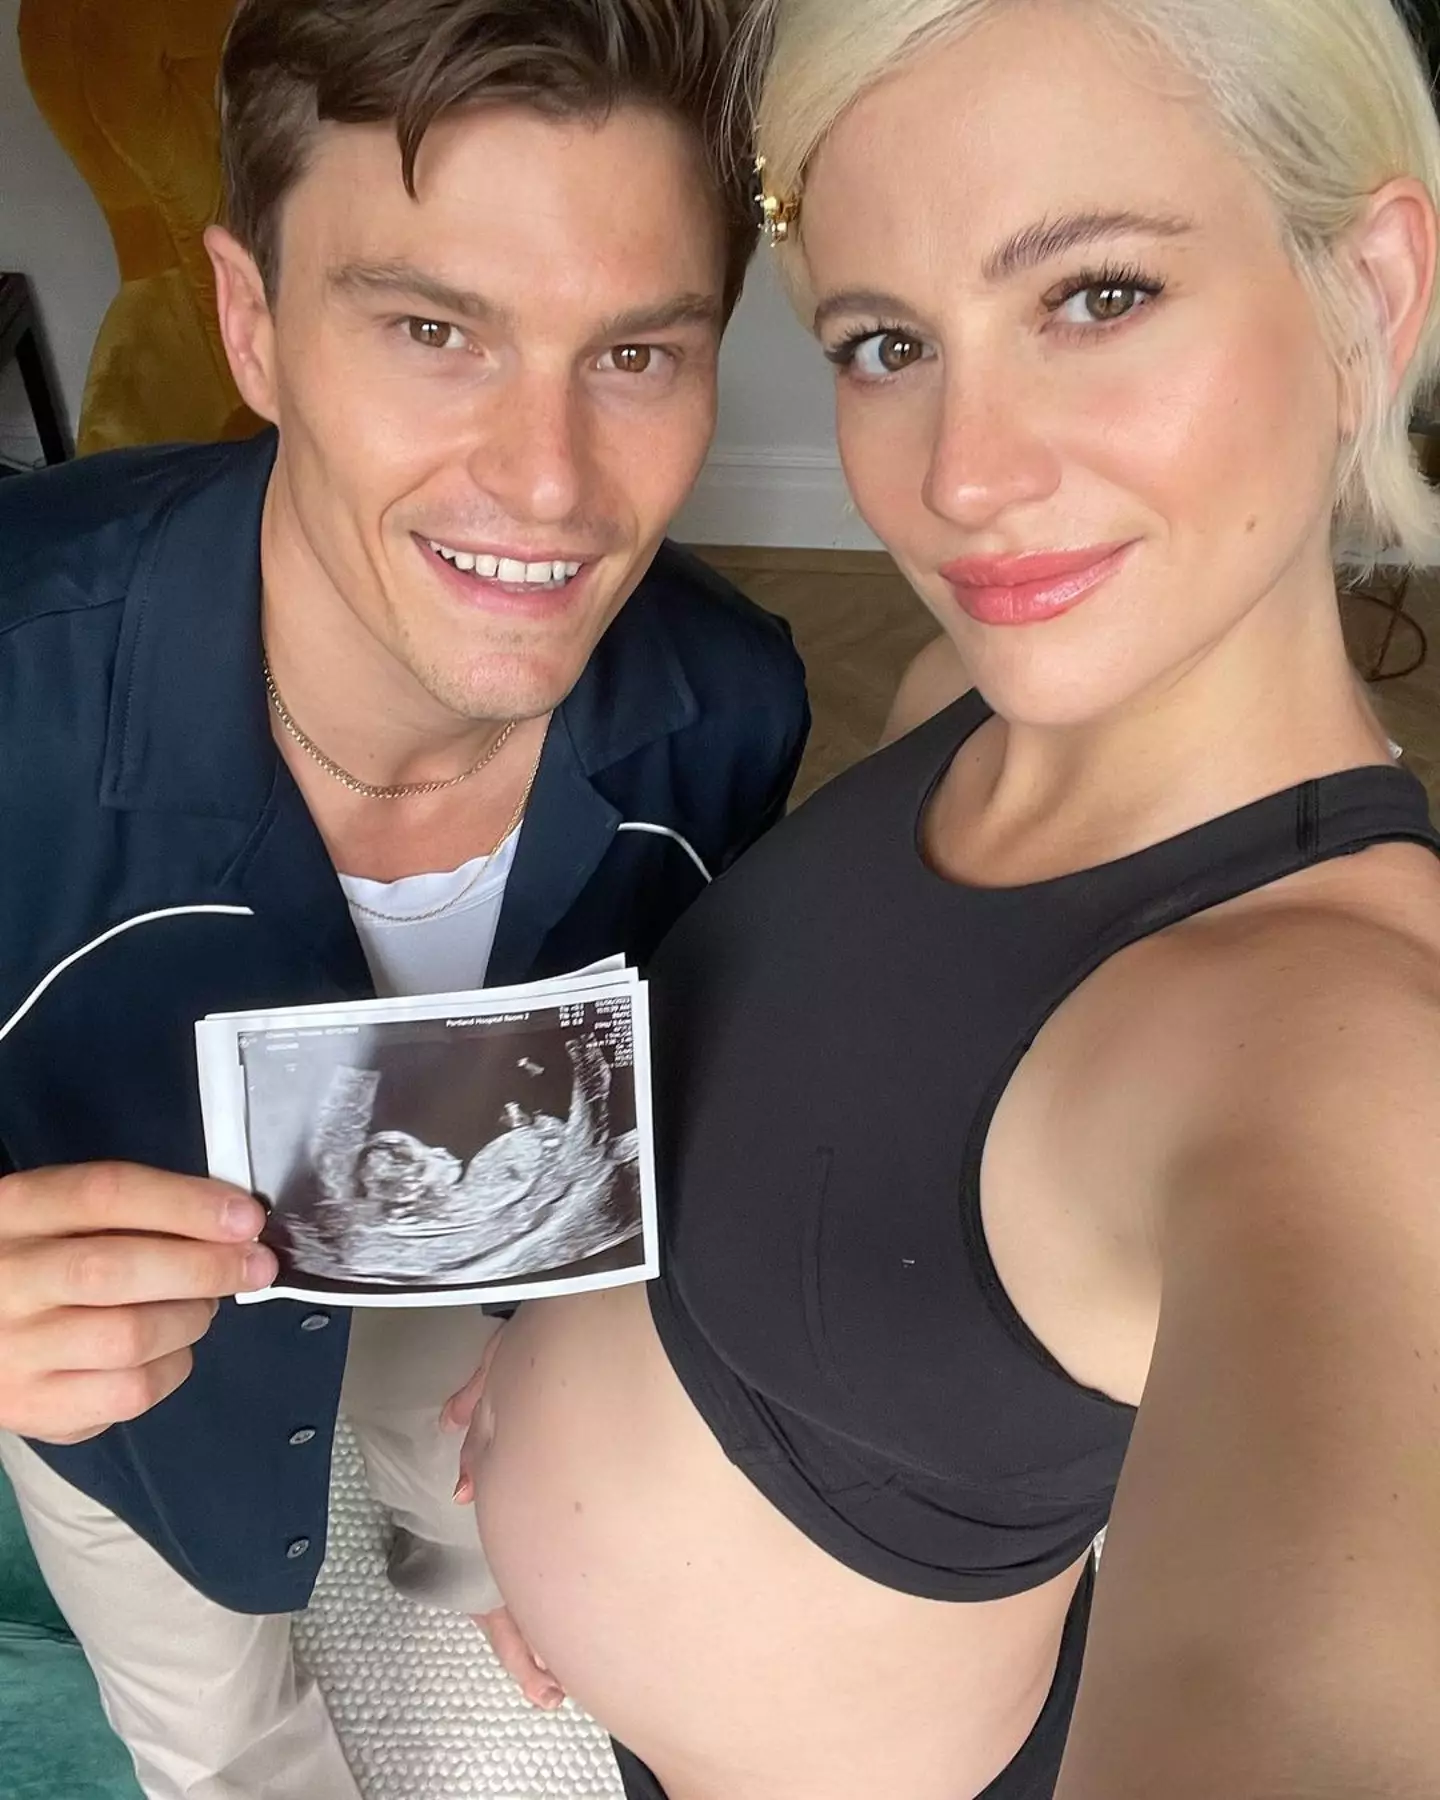 Pixie Lott announced she was pregnant with her first child earlier this year.